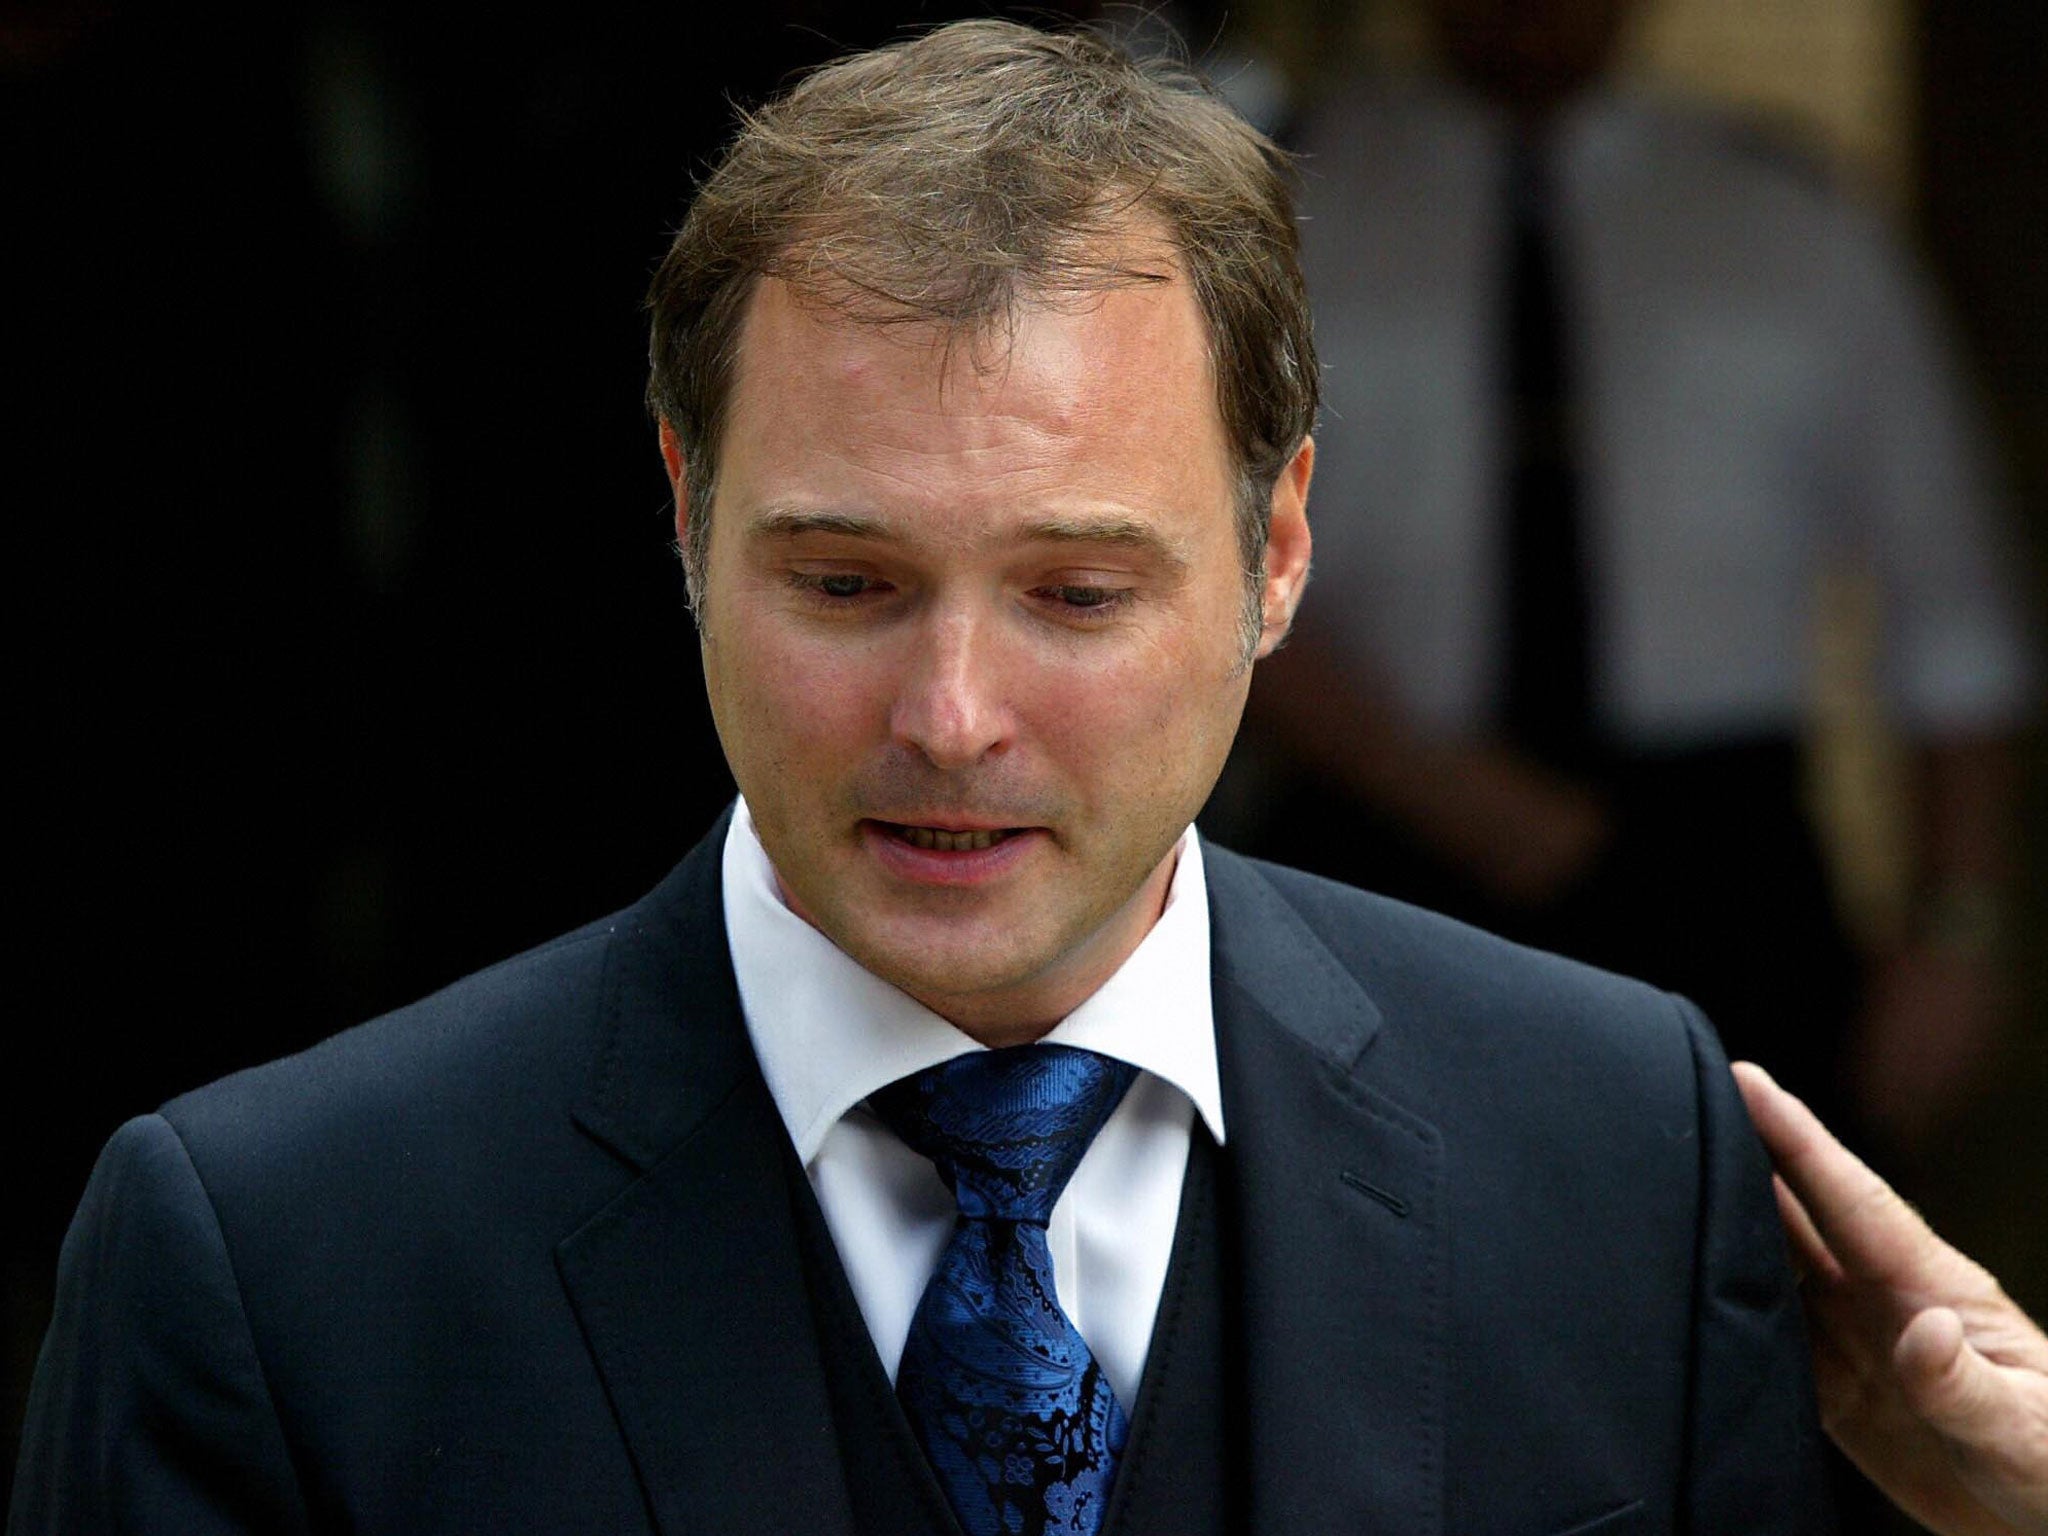 British ex-television presenter John Leslie in tears as he speaks to the media after he was cleared of all charges against him at Southwark crown court in London 31 July 2003.